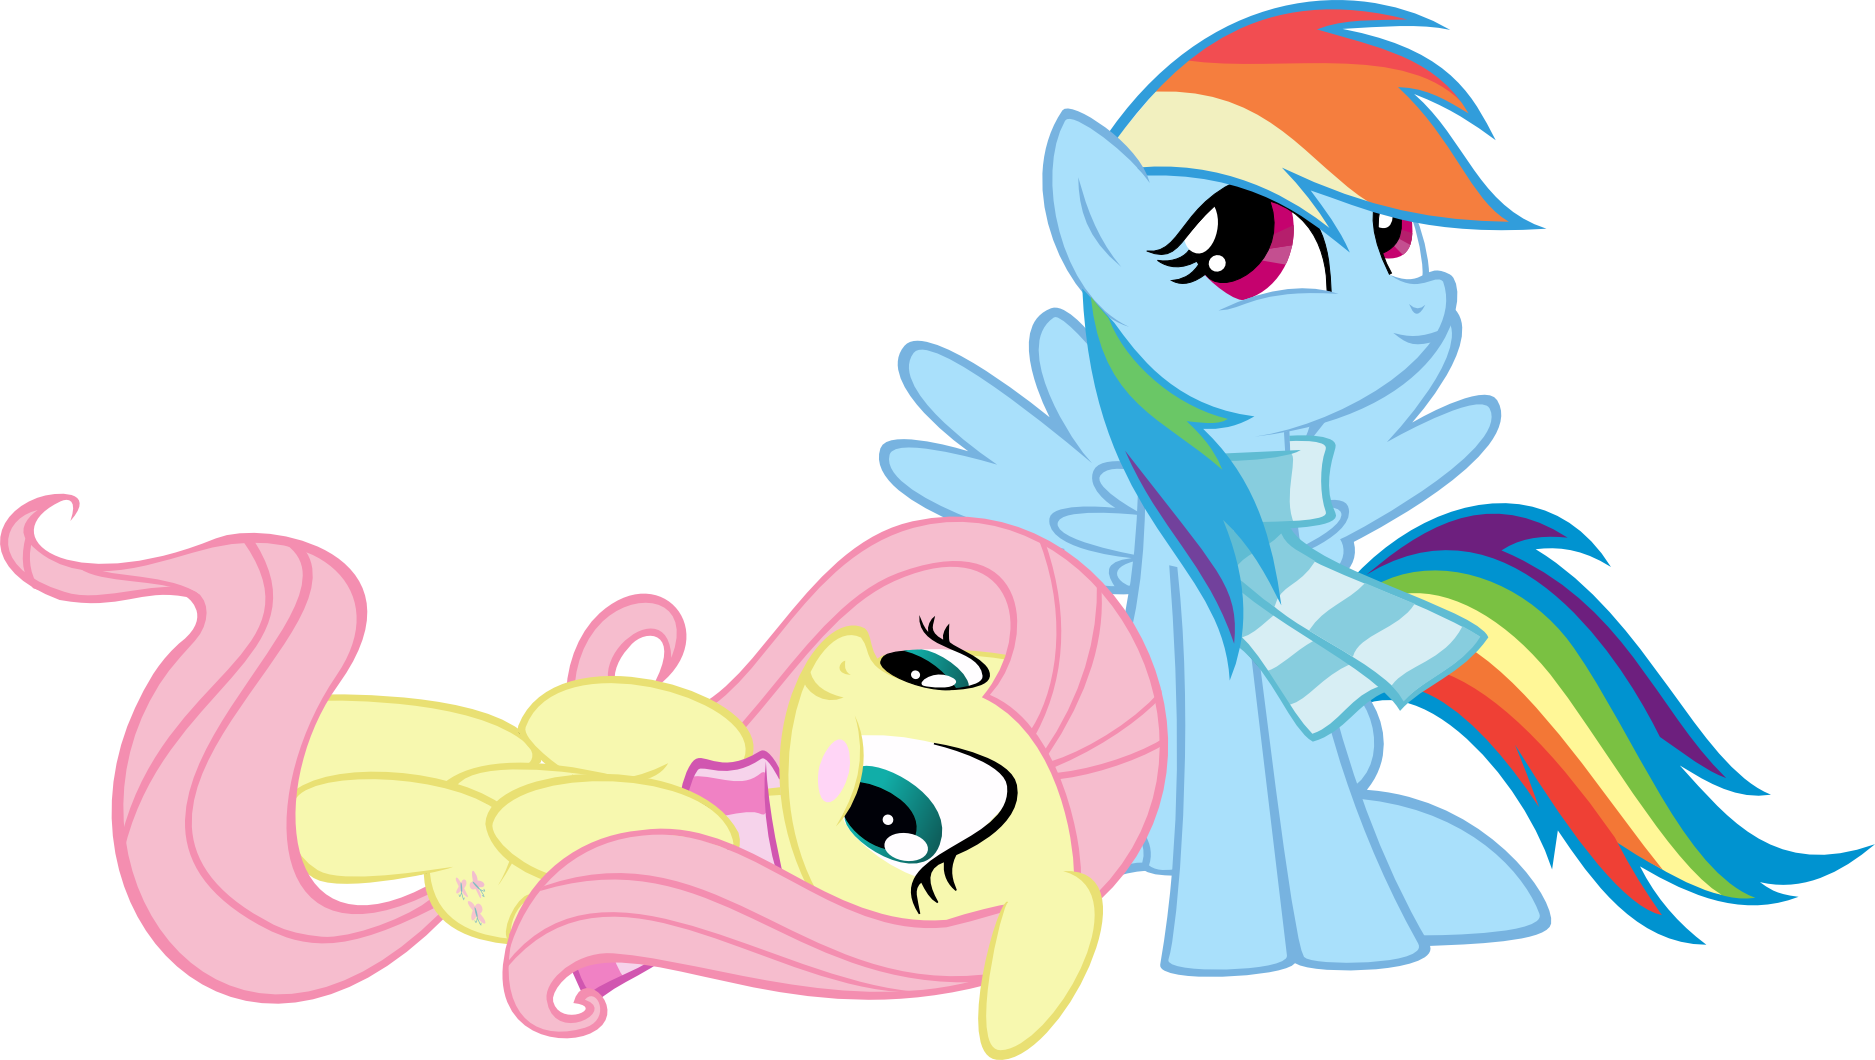 Fluttershy And Rainbow Dash By Muhmuhmuhimdead Fluttershy - Mlp Rainbow Dash X Fluttershy Fanfic (1875x1060)